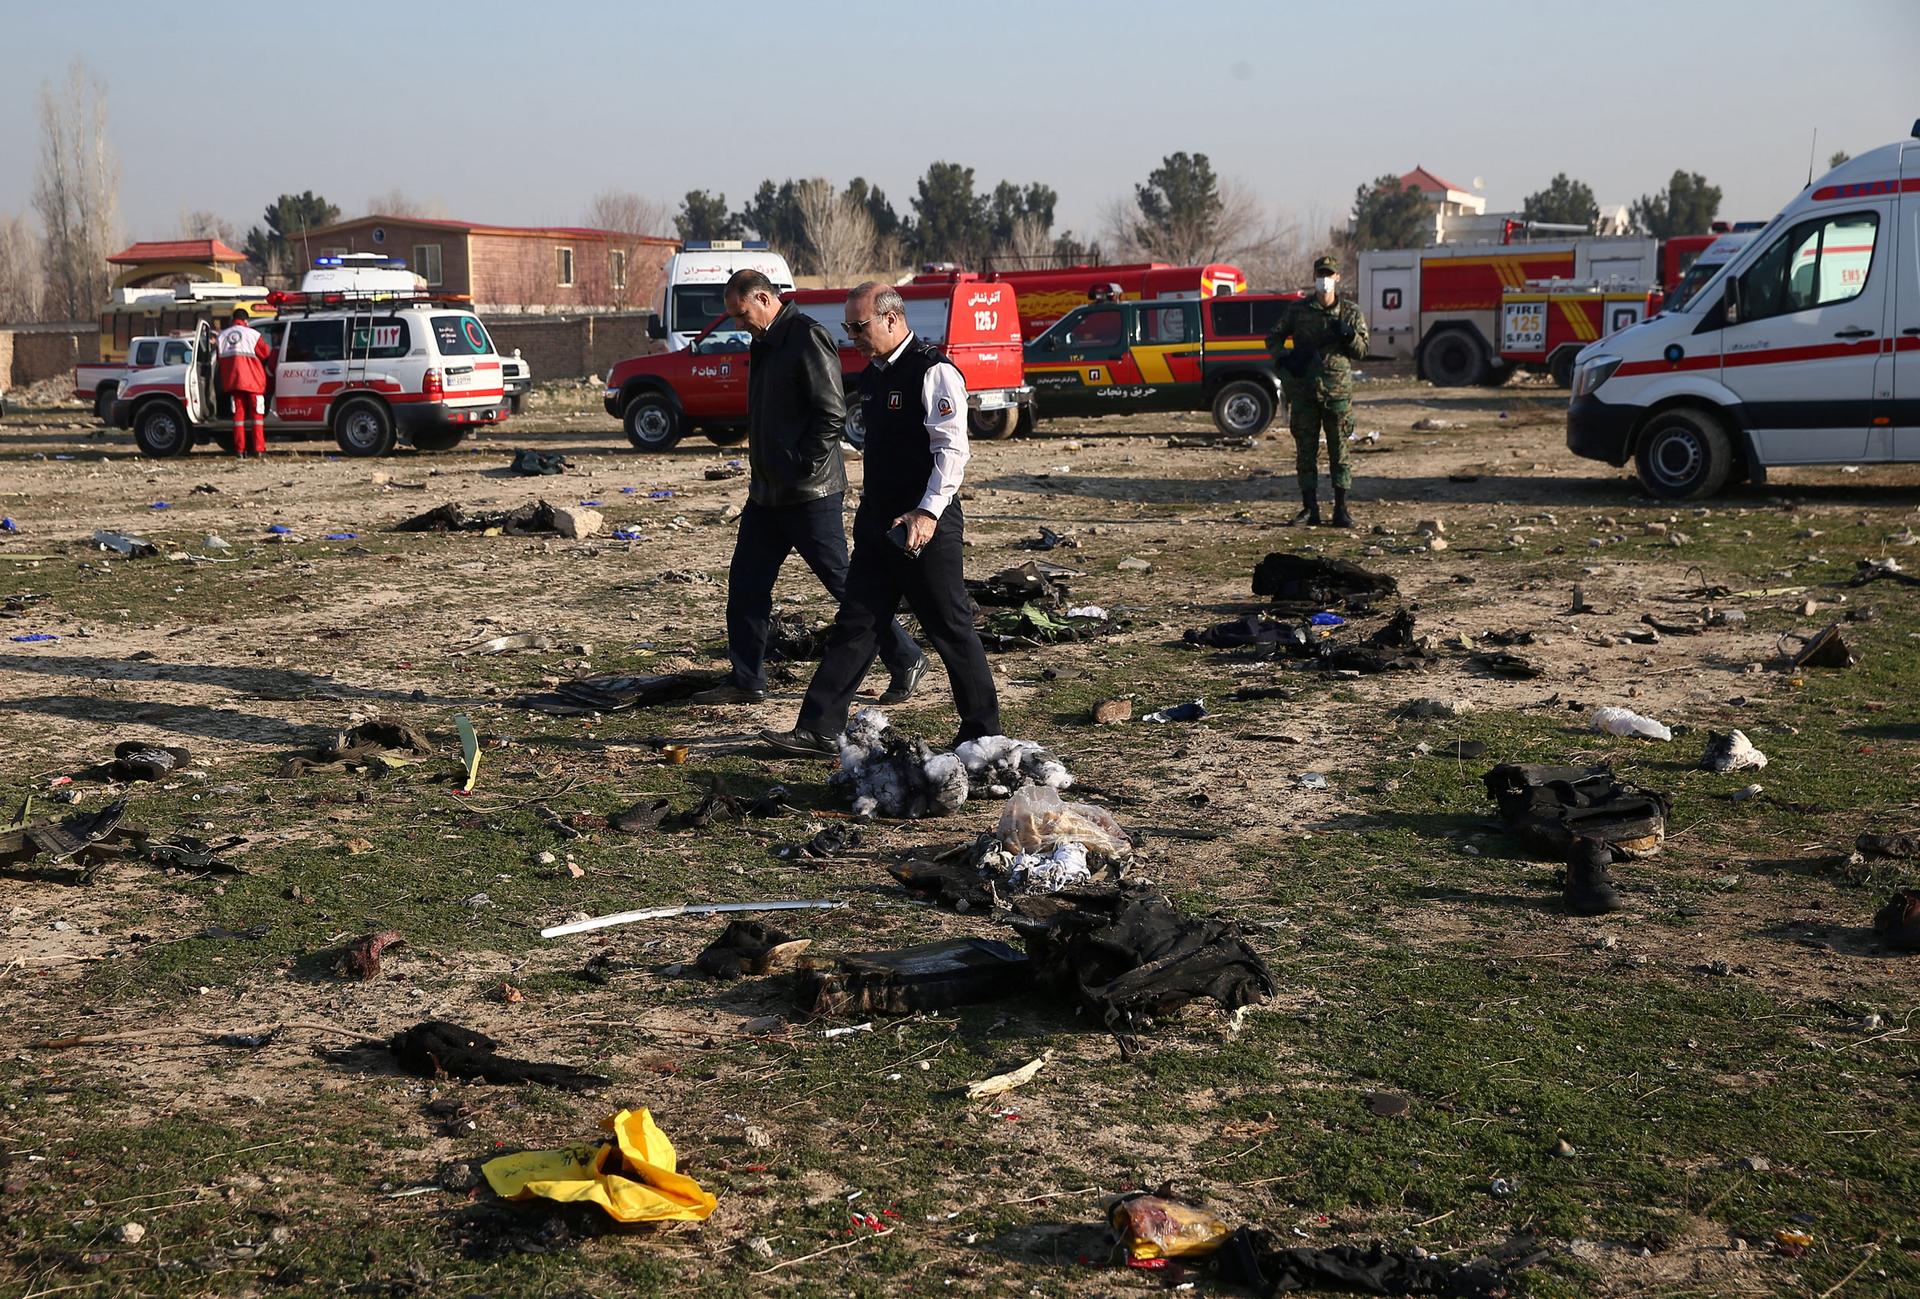 Two people are shown walking across a field strewn with reminant of a plane crash with several emergency vehicles in the background.